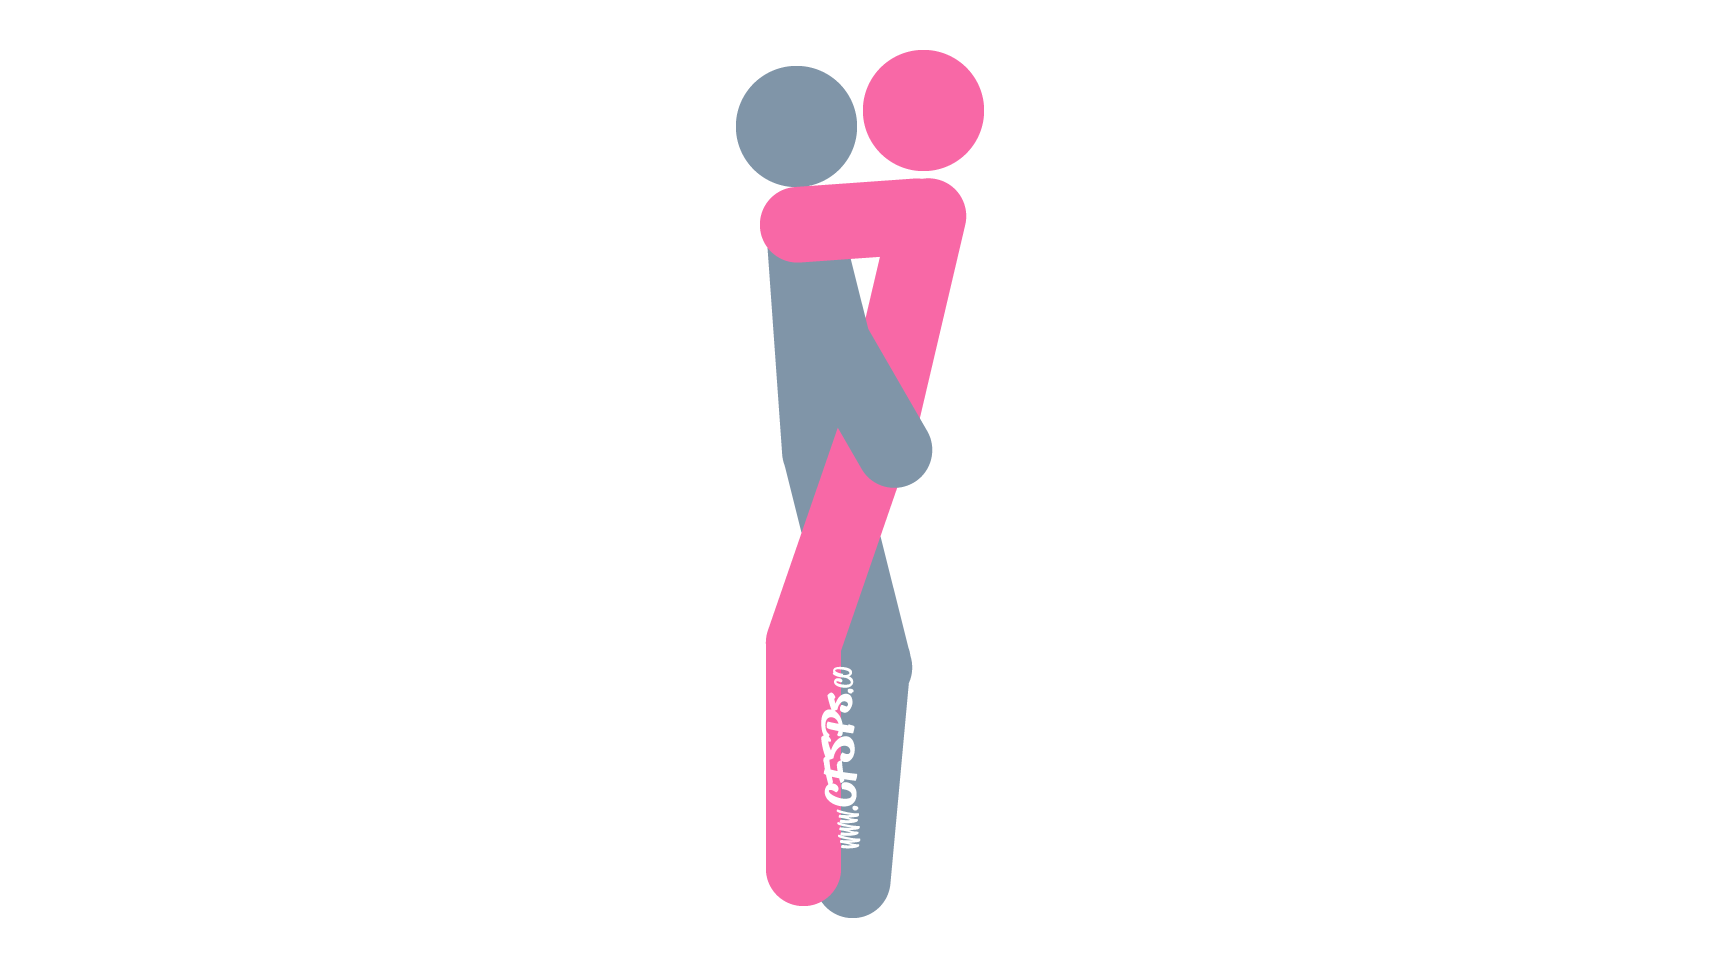 An illustration of the Extension Cord sex position. This picture demonstrates how Extension Cord is an intimate, standing sex position that's enjoyed with the woman's back against the wall.